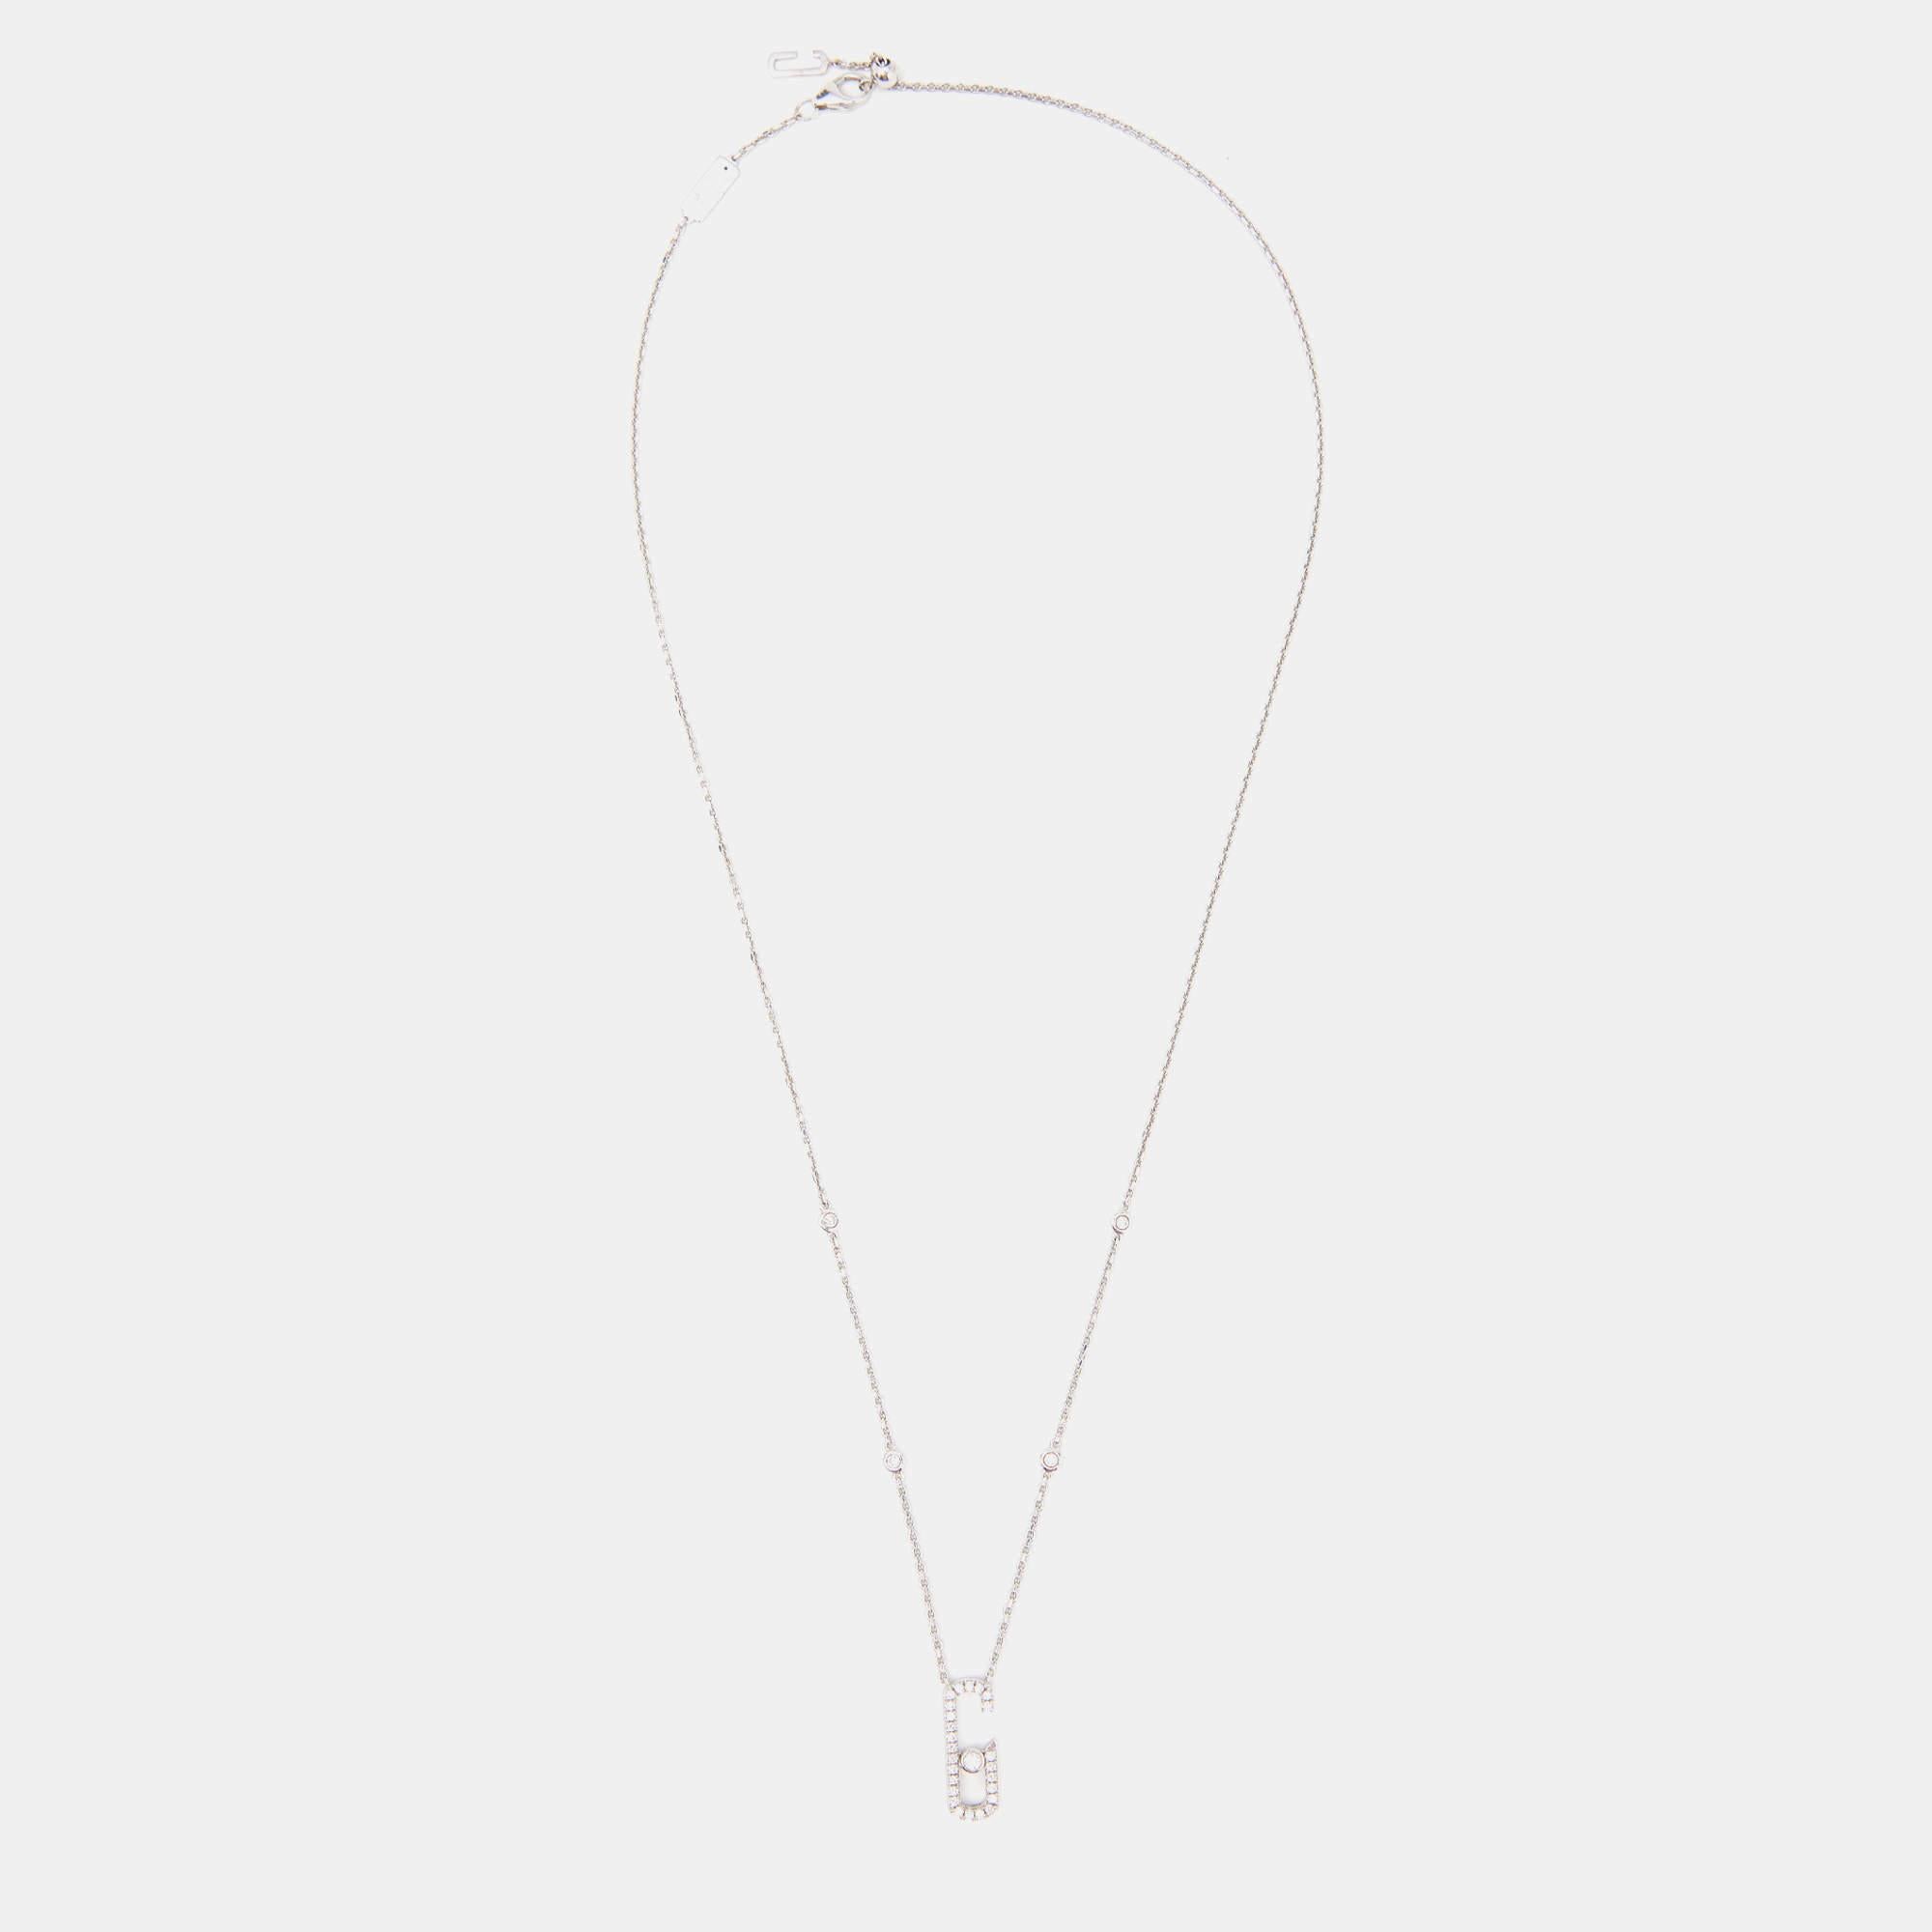 Bringing the precision of graphic designs into fine jewelry making, the Move Addiction collection of Messika is a subtle combination of fun style and elegance. This necklace is designed from 18k white gold and features a beautiful pendant that has a